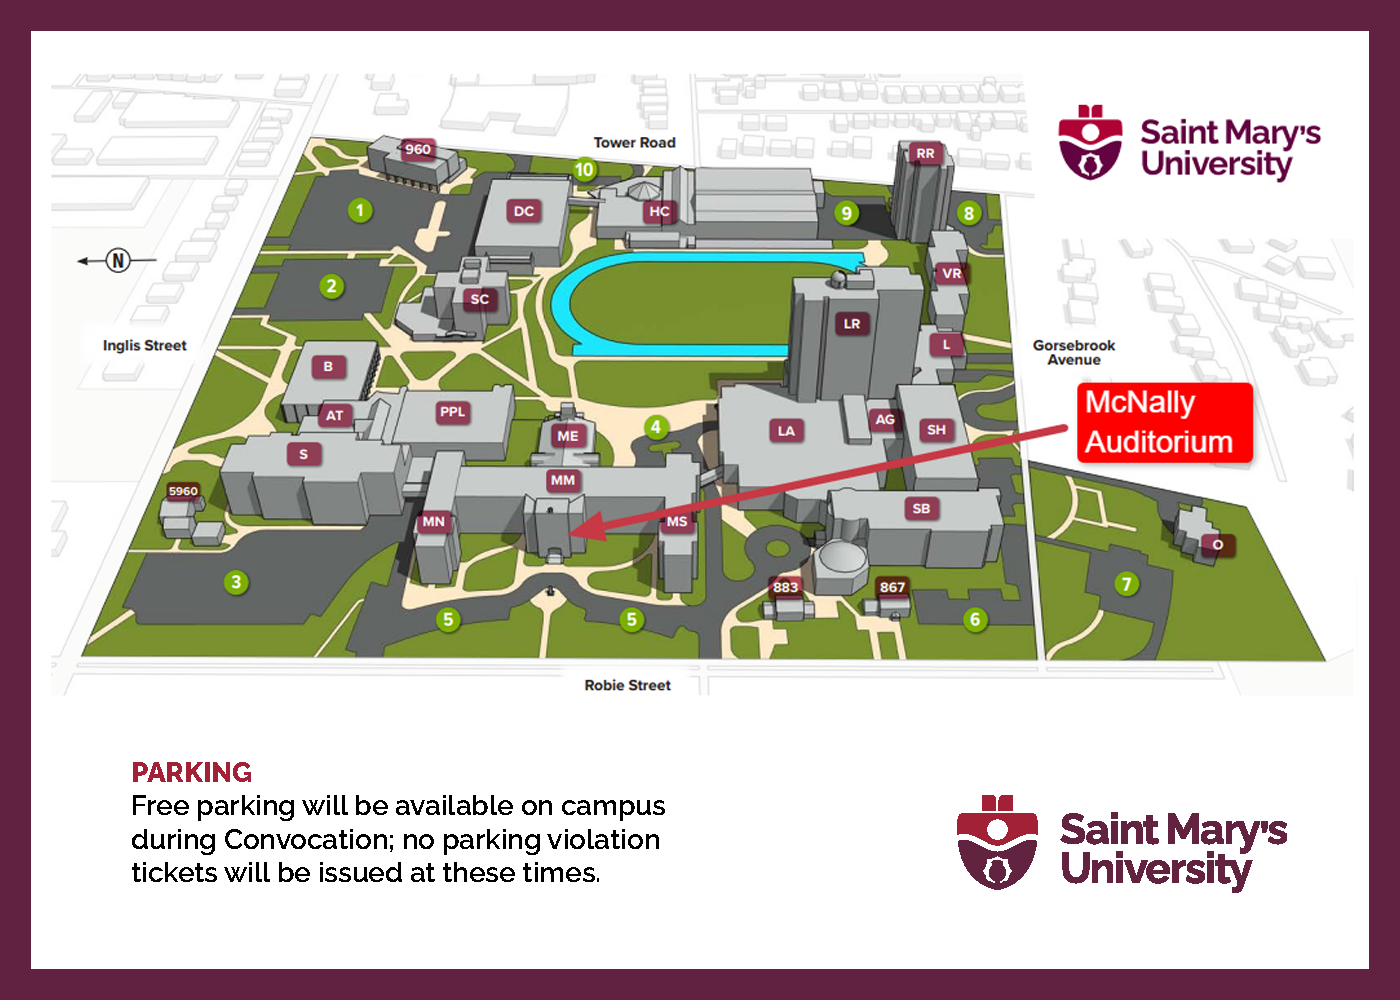 Campus Map/Parking Graduation and Convocation Saint Mary's University